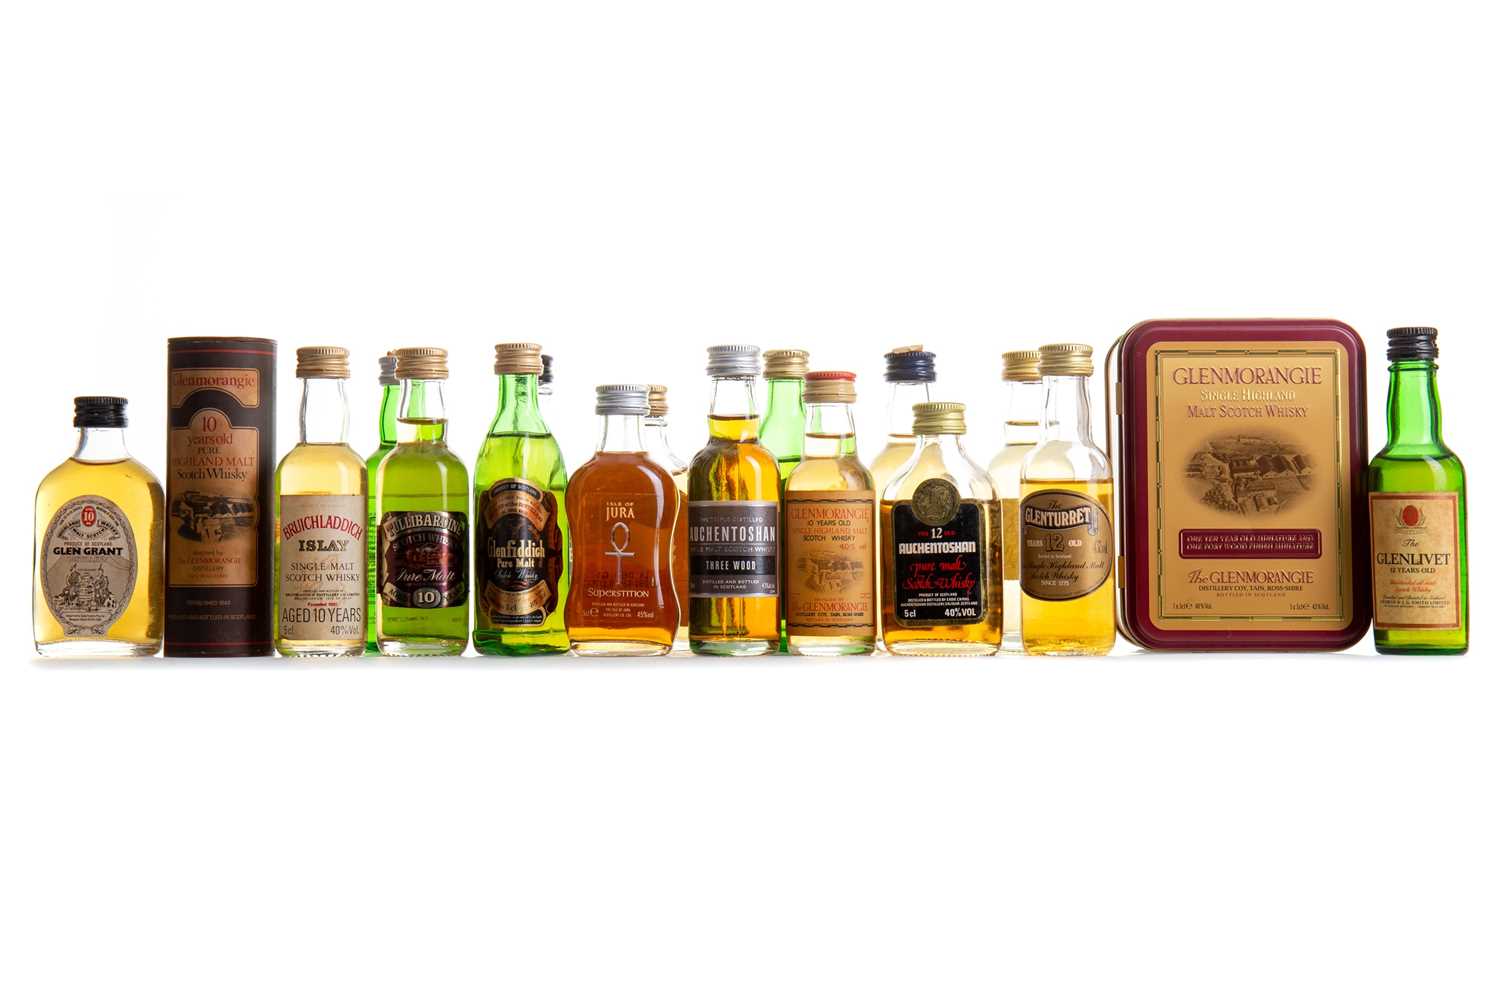 Lot 44 - 20 ASSORTED WHISKY MINIATURES - INCLUDING GLEN GRANT 10 YEAR OLD